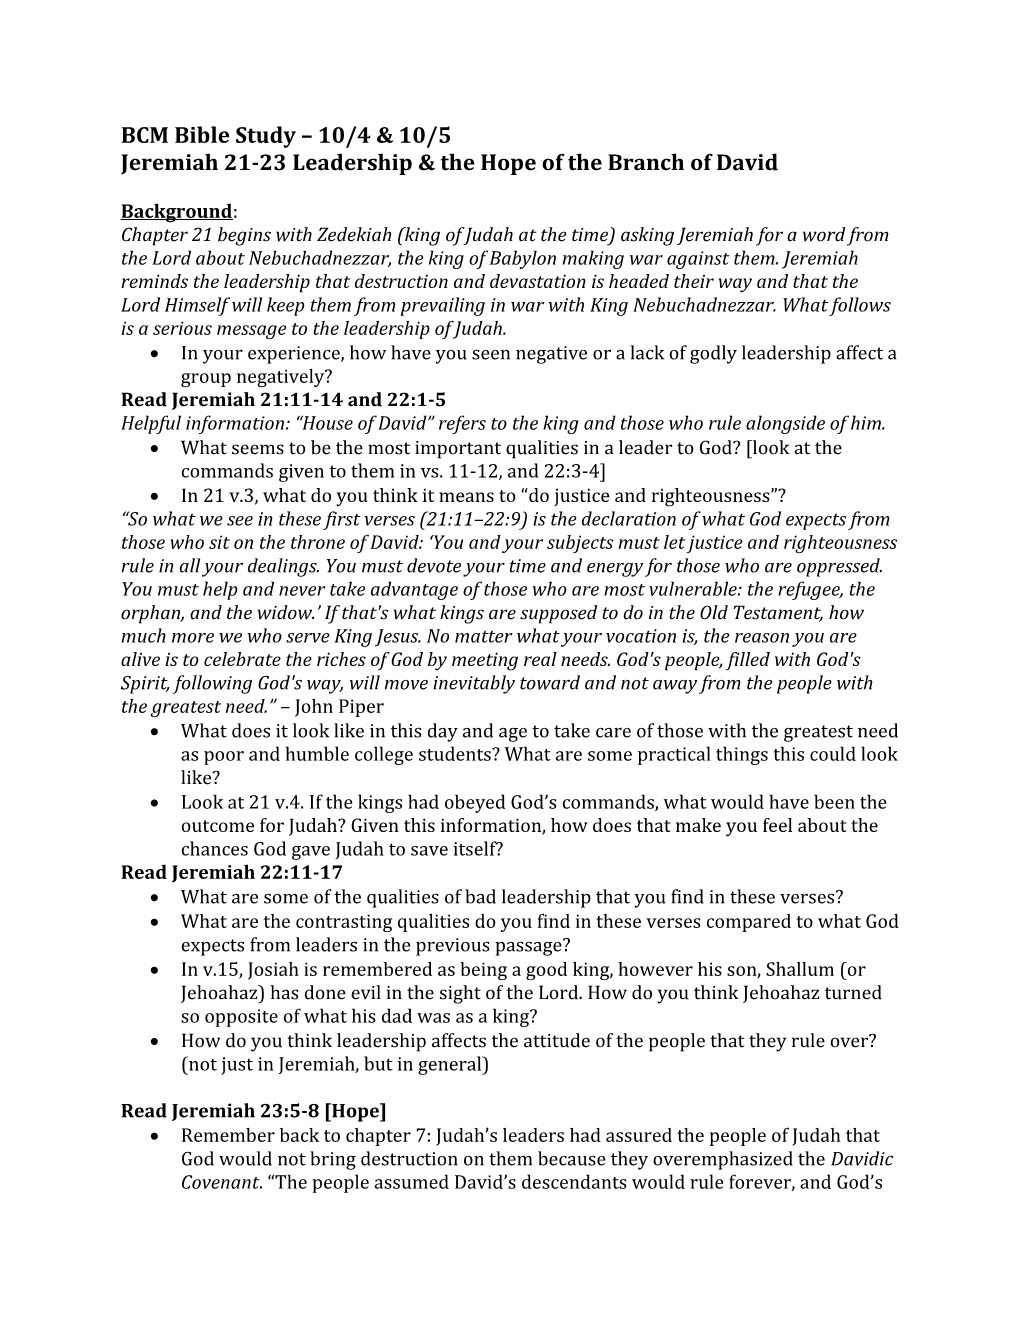 Jeremiah 21-23Leadership & the Hope of the Branch of David